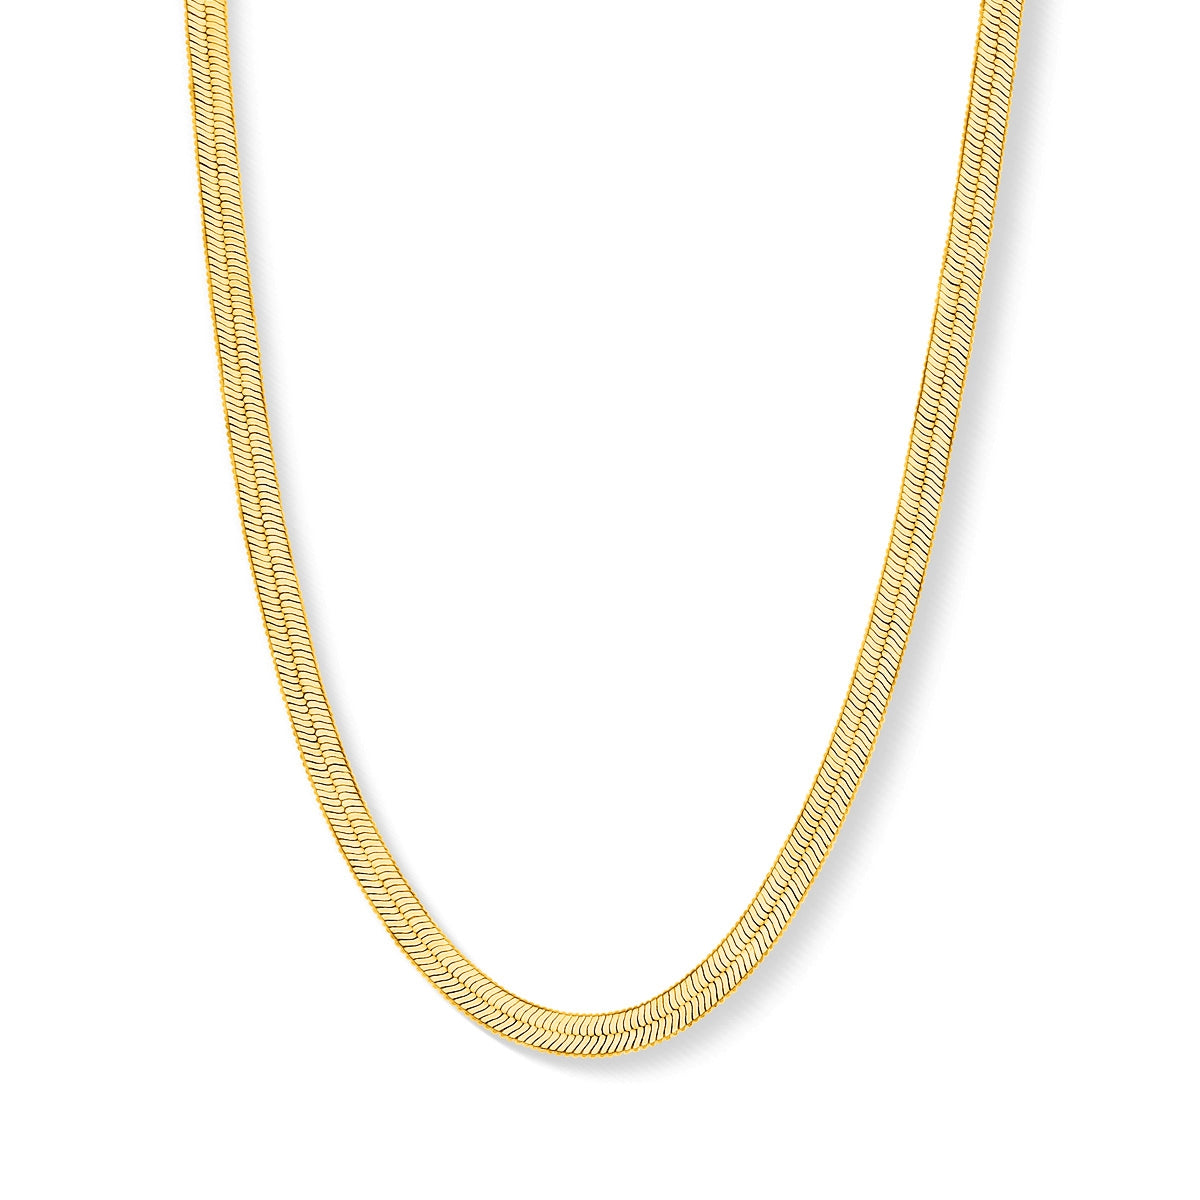 Thick flat gold plated necklace